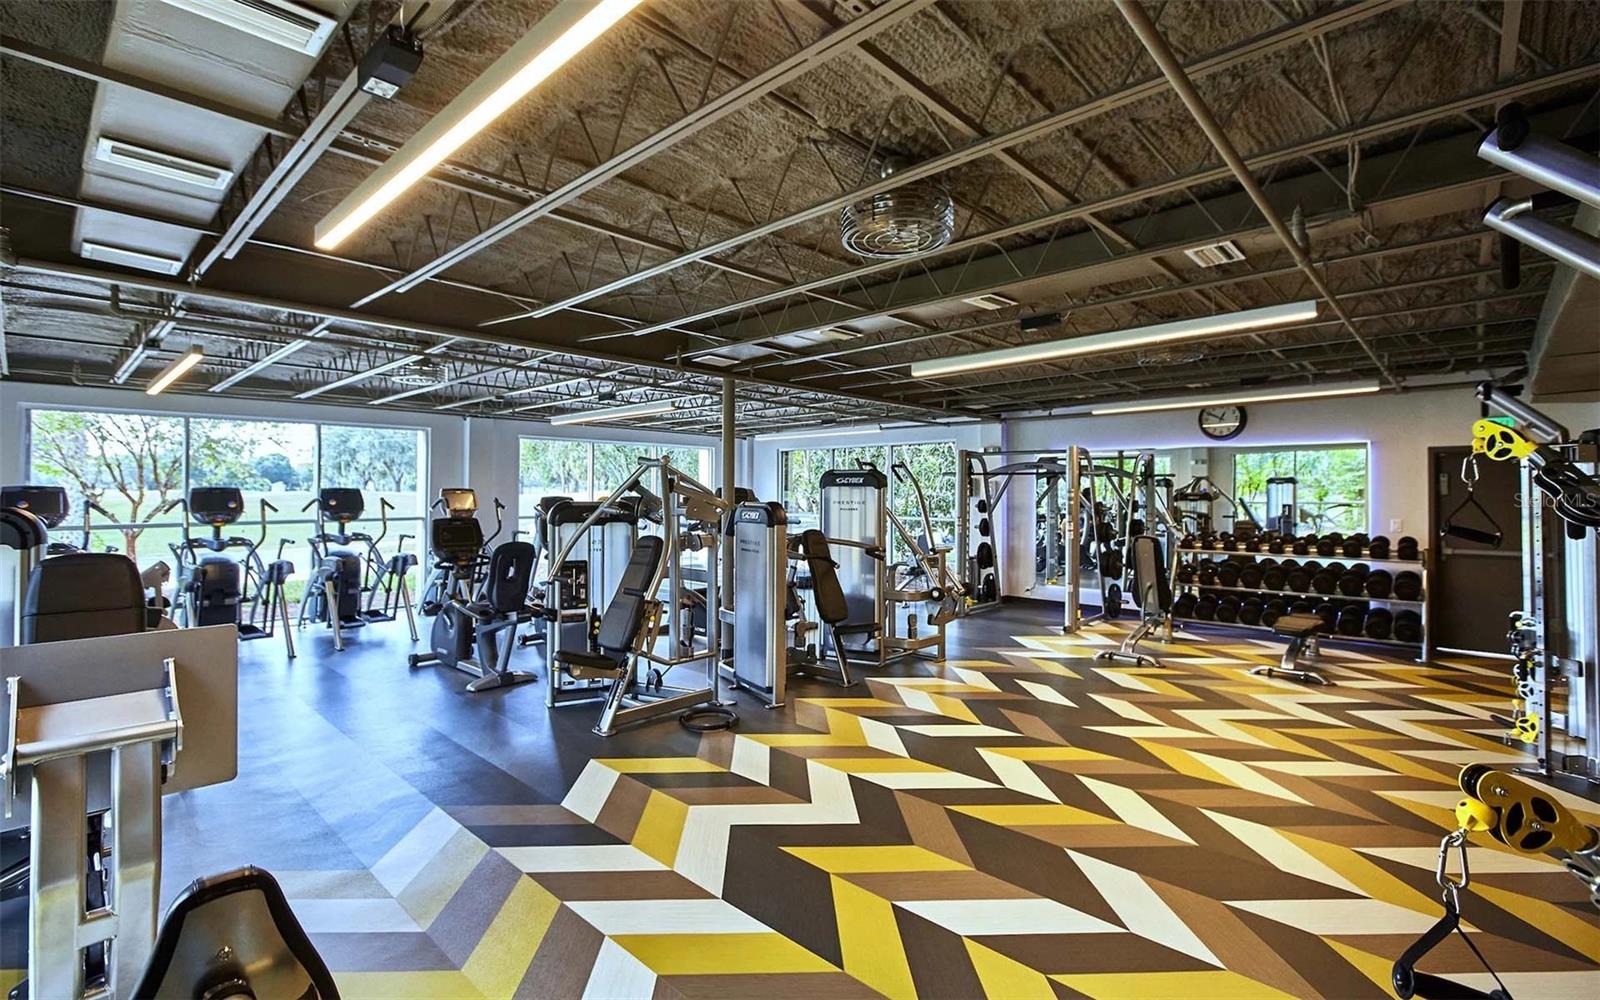 HOA Amenity -Community fitness center equipped with the latest state-of-the-art, top-of-the-line exercise equipment